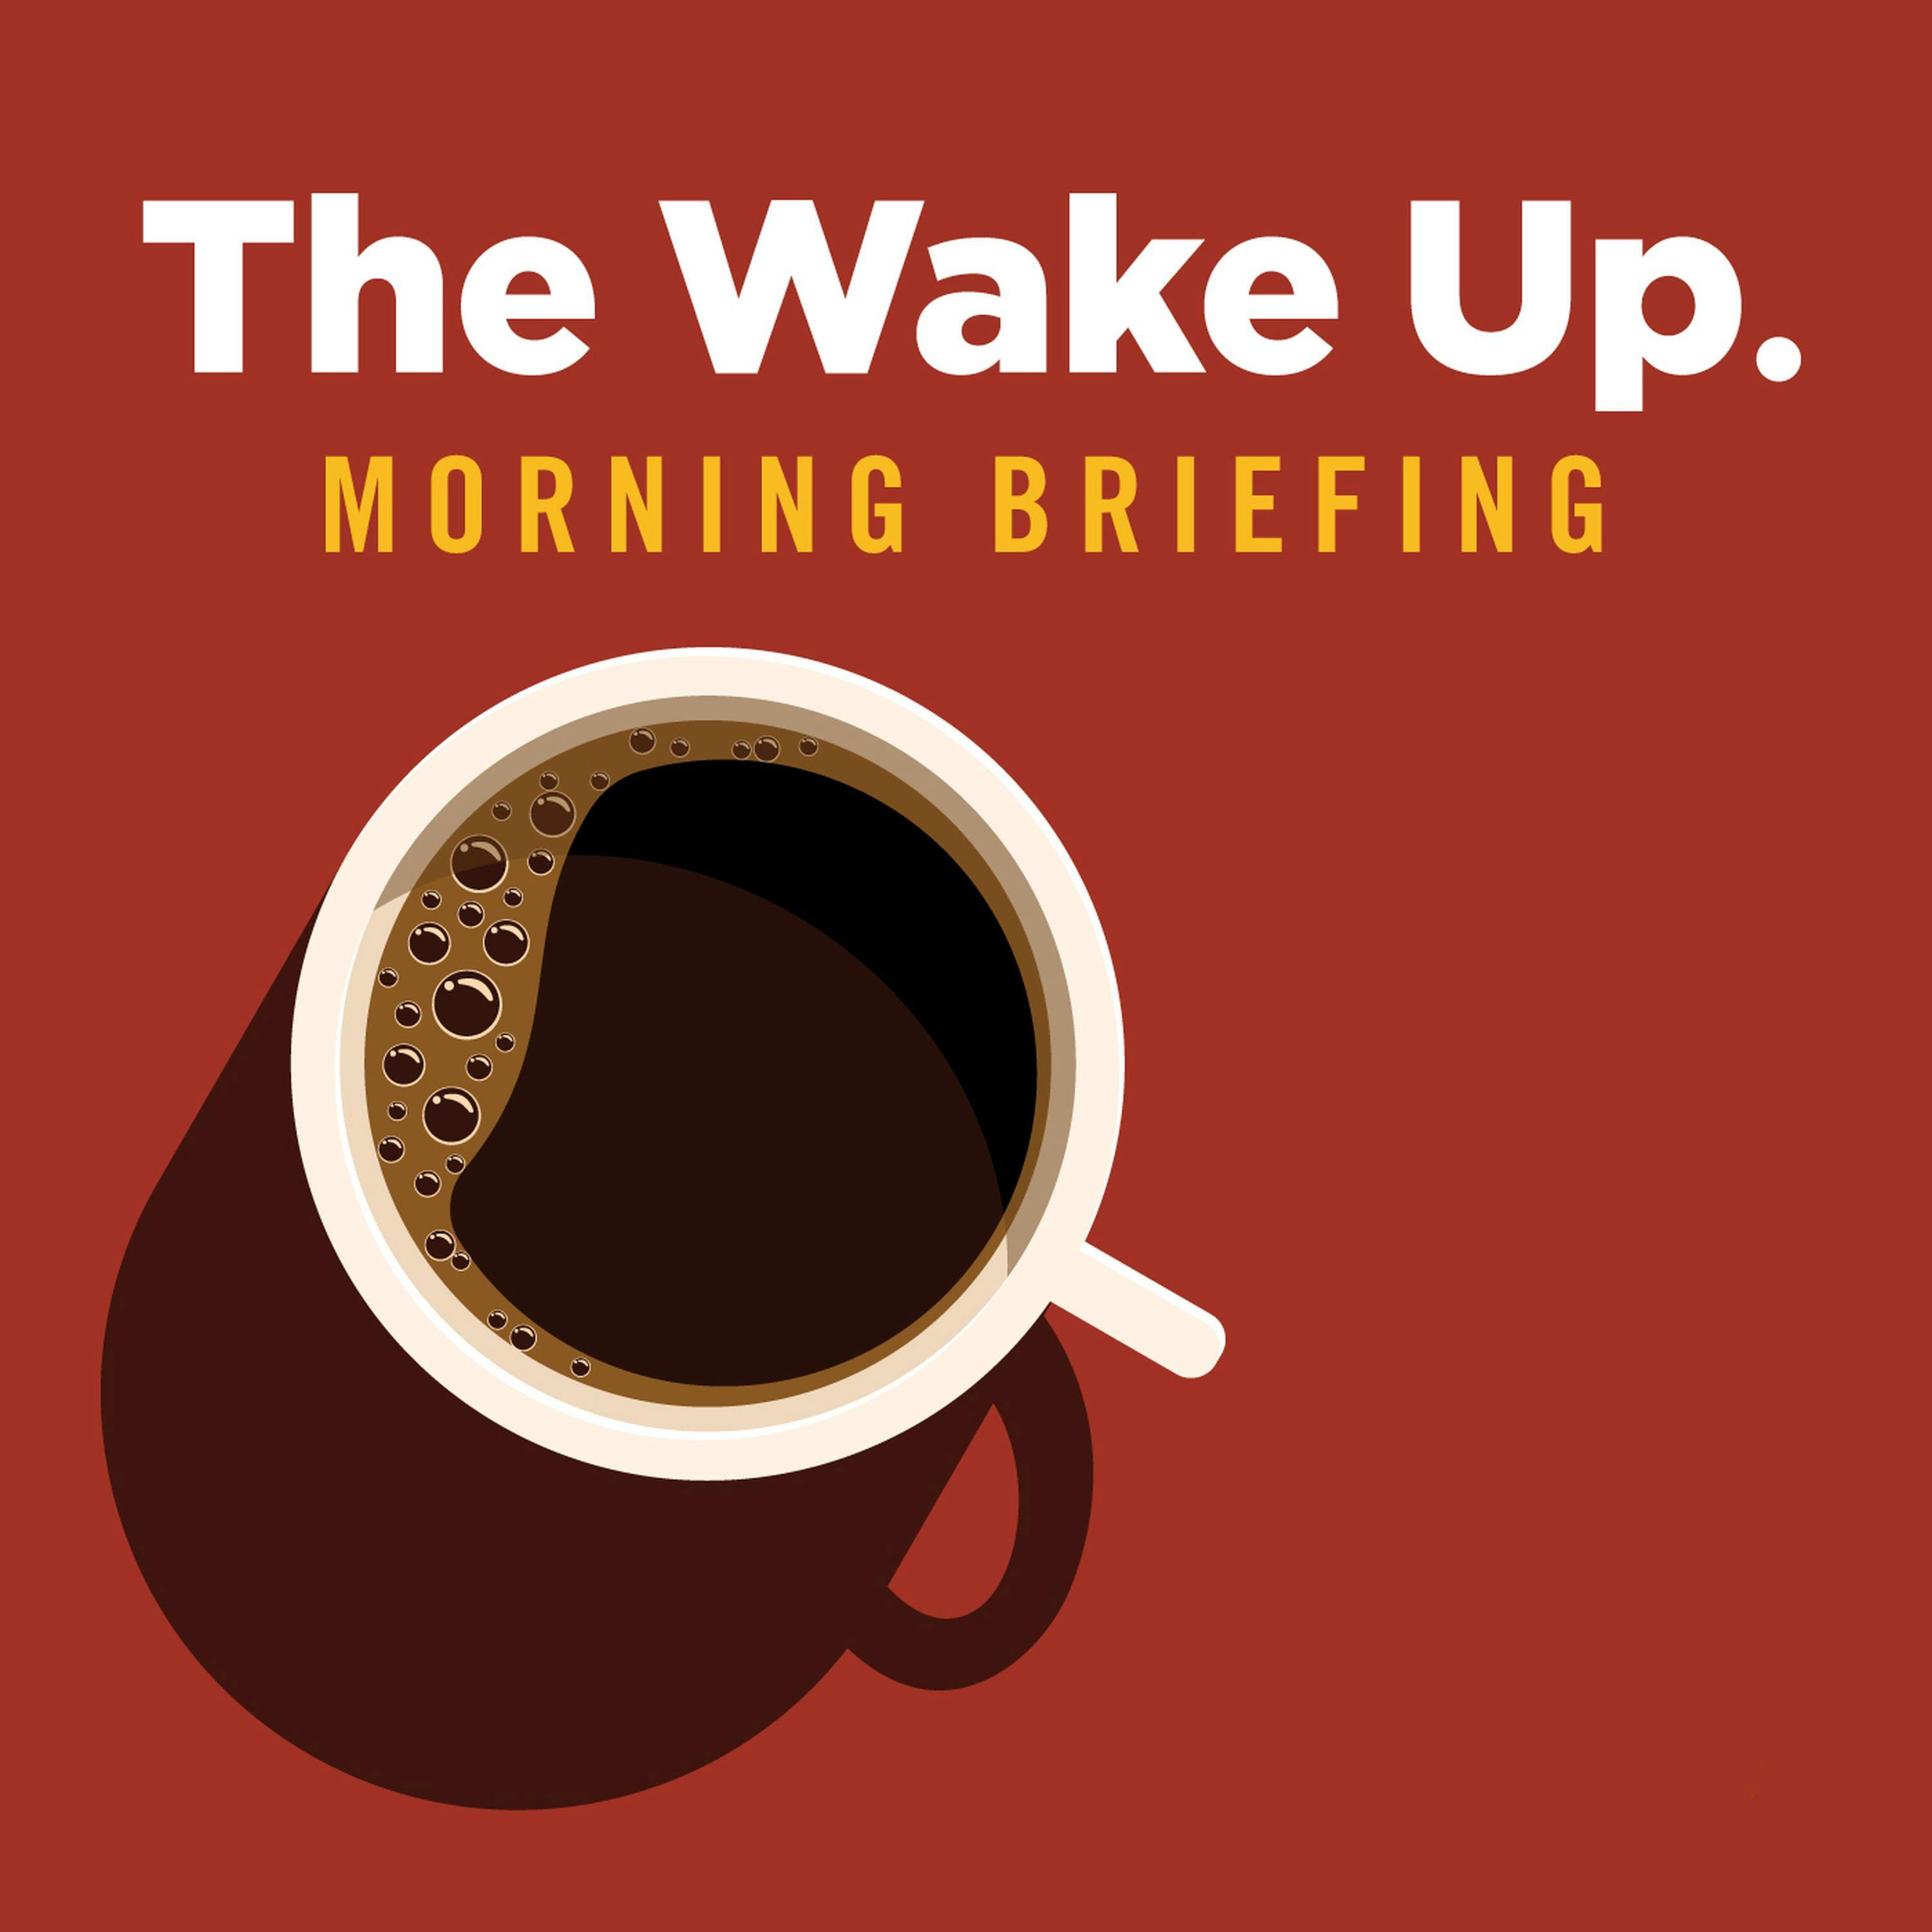 The Wake Up - May 11, 2020 One of Greater Cleveland's most notorious crooks is out of prison